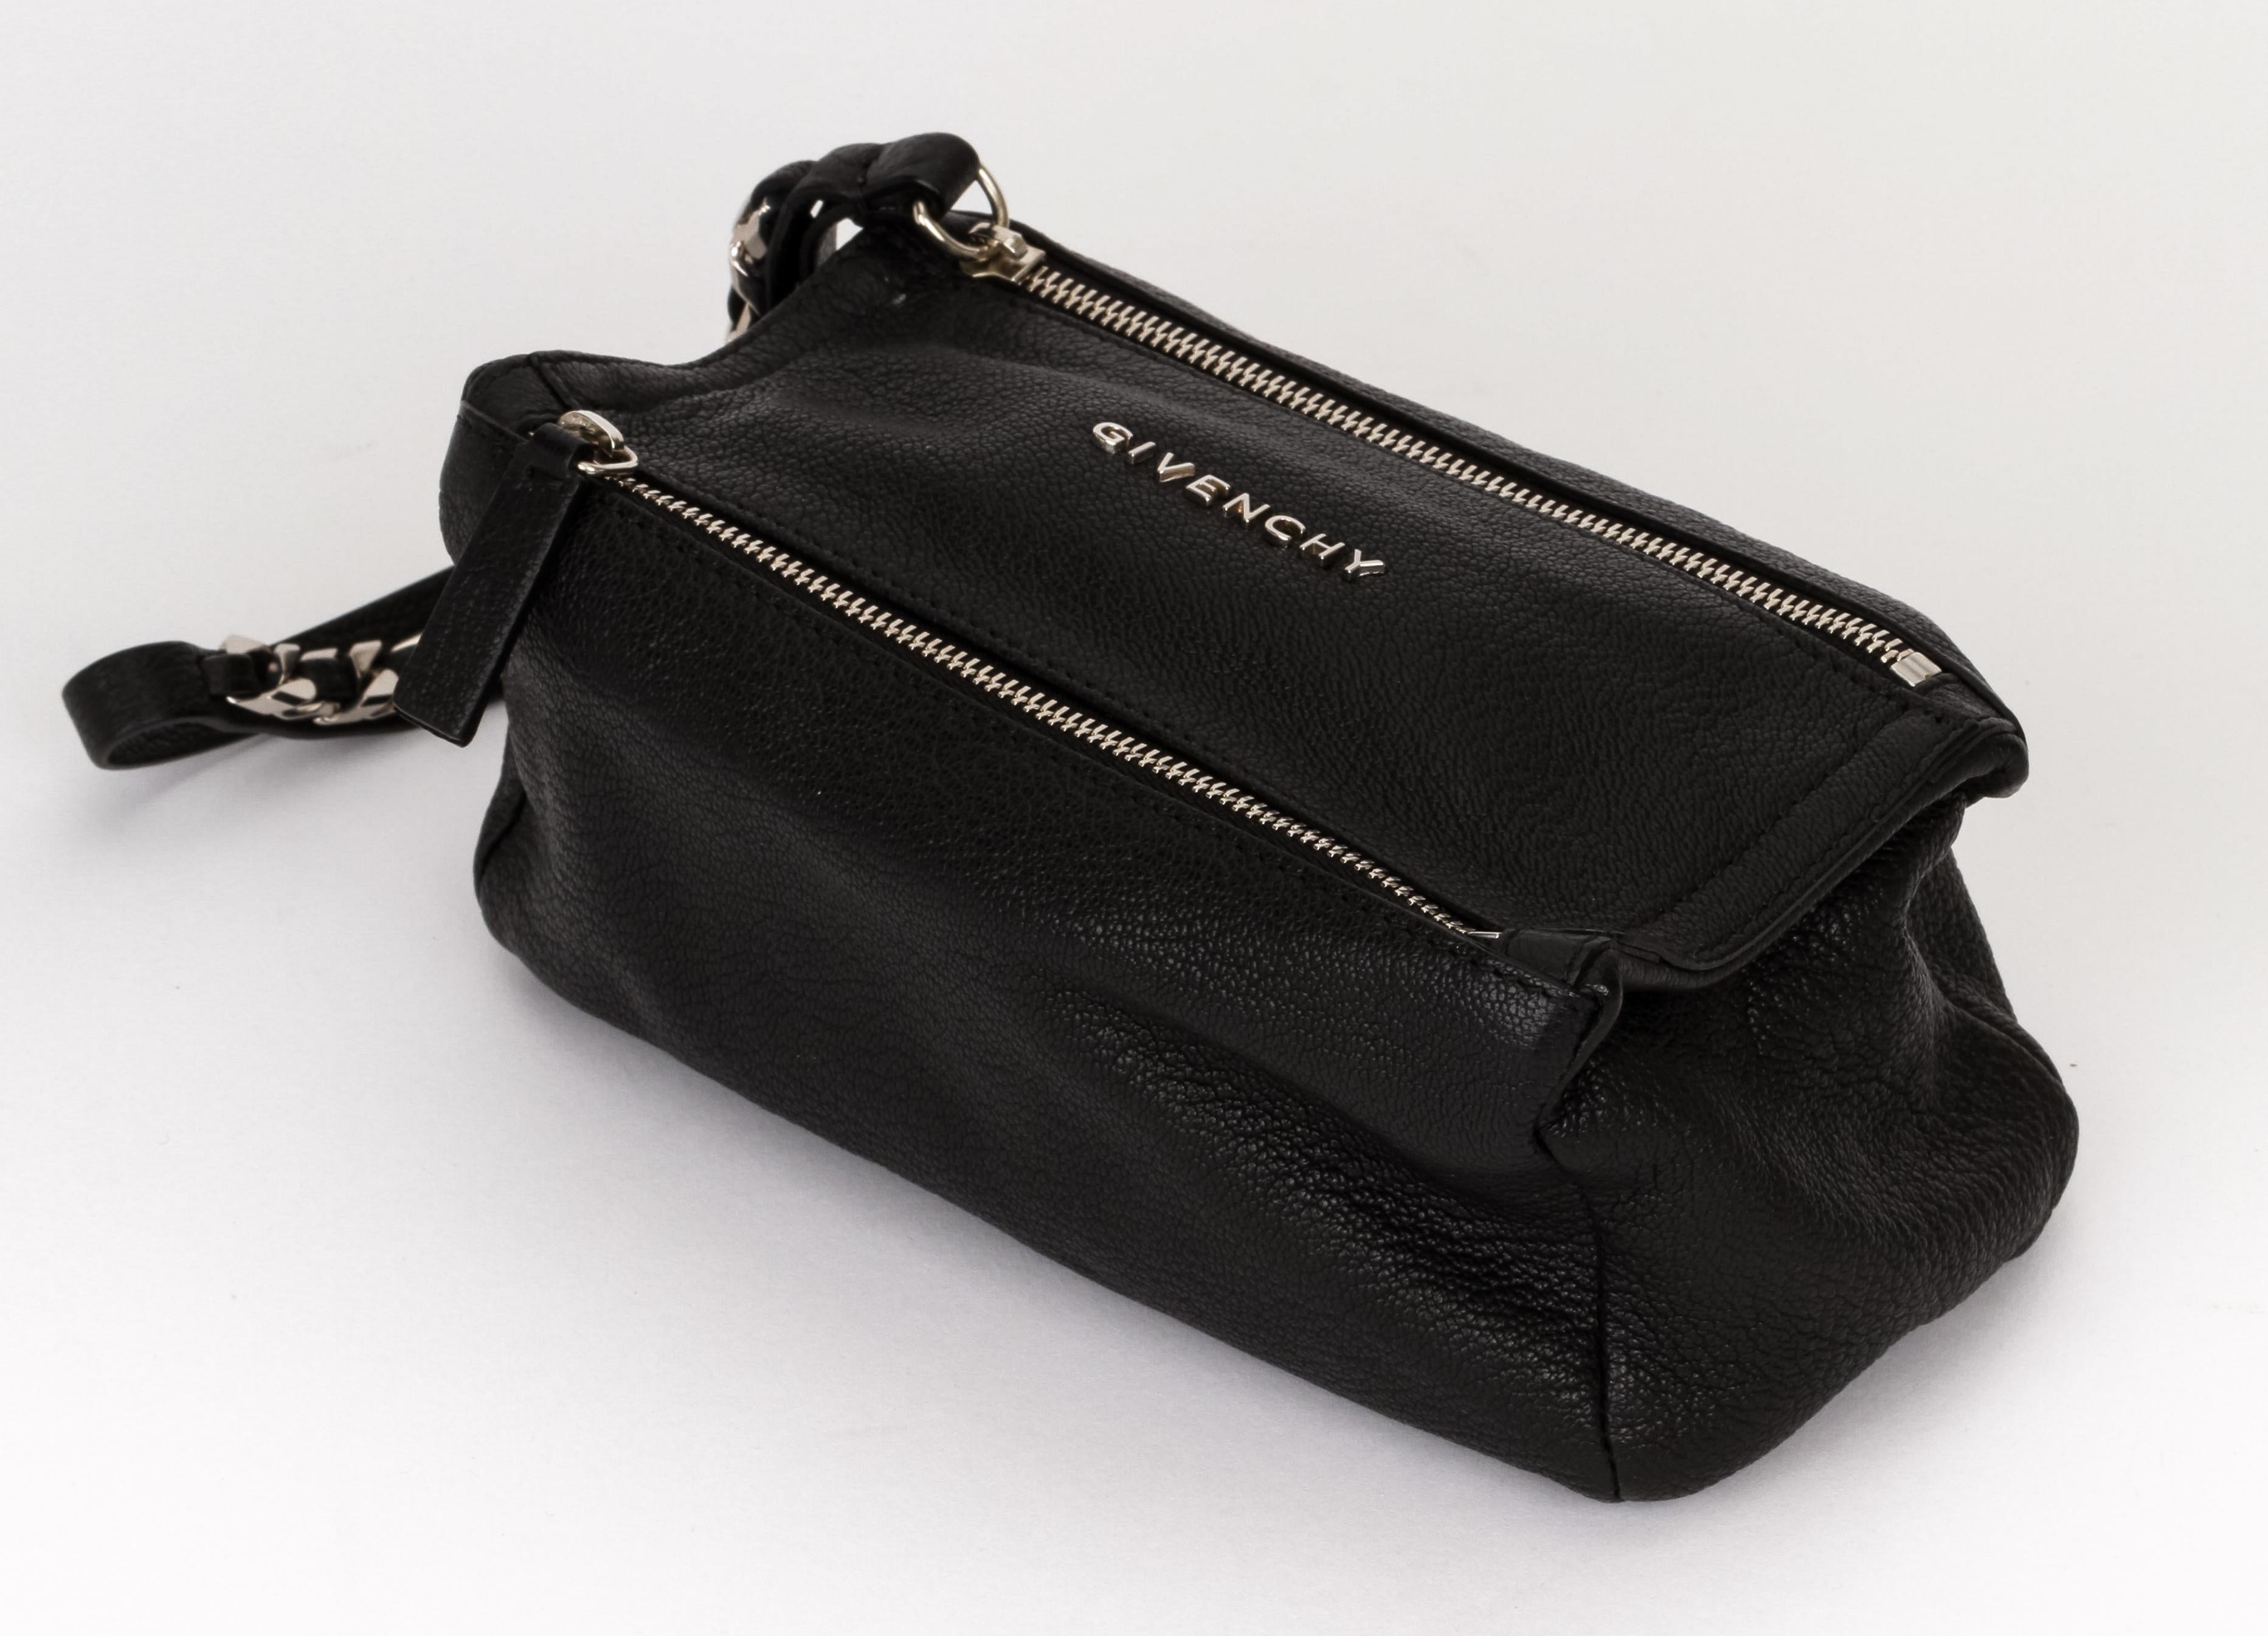 New Givenchy black leather double zip pochette with chain handle. Original dust cover.